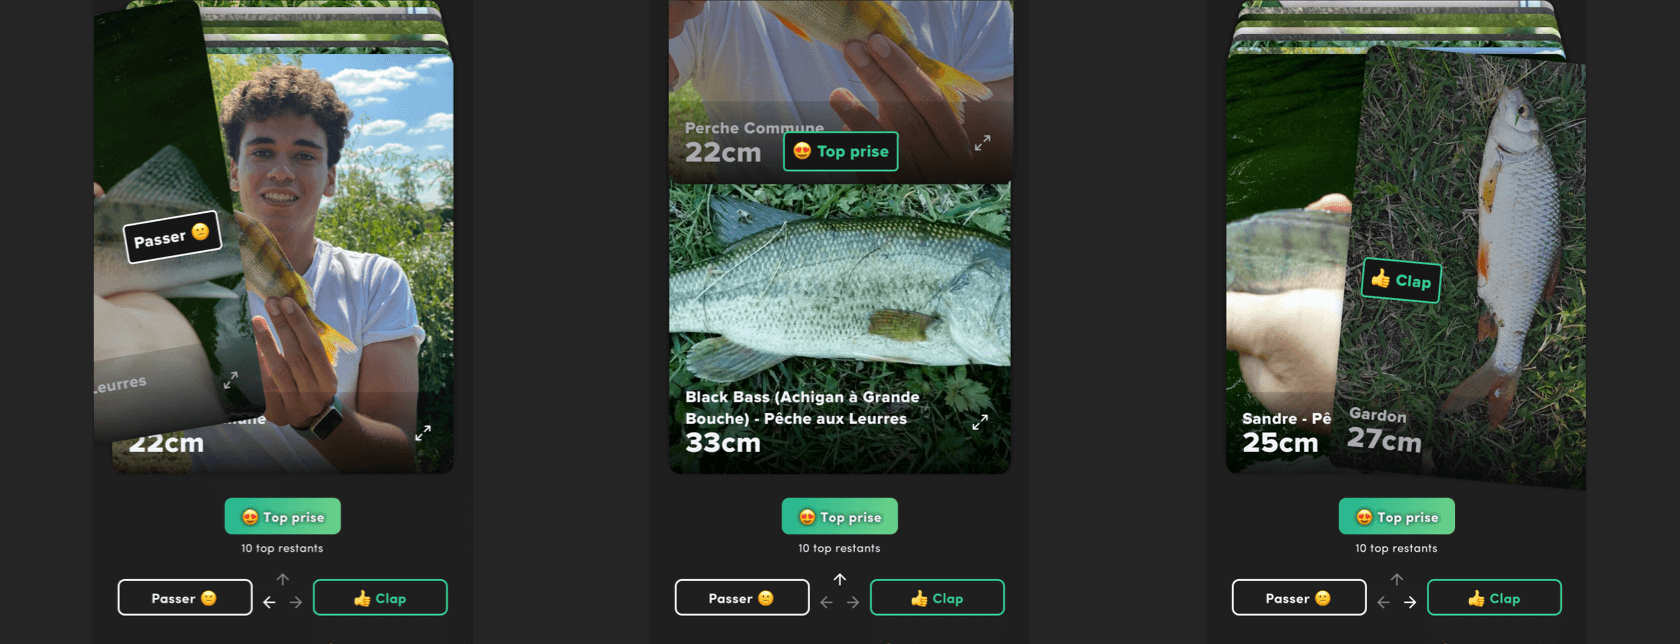 Tinder for Fishers?